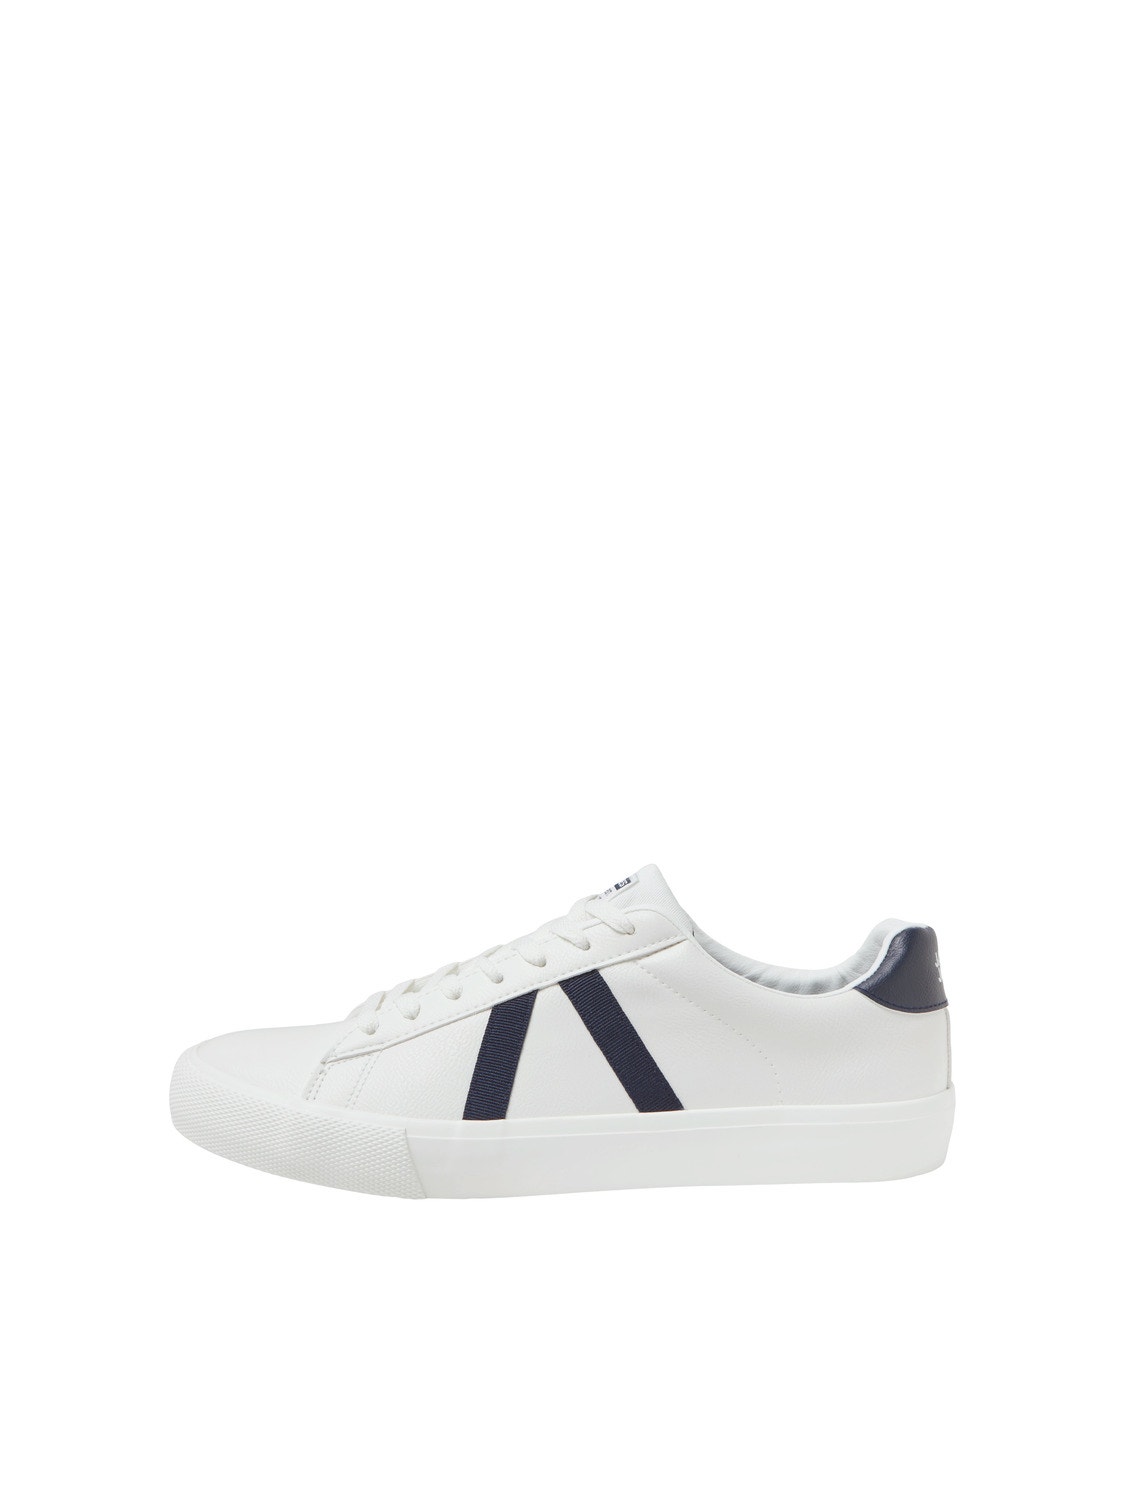 Jack & Jones Polyester Trainers -Bright White - 12230427